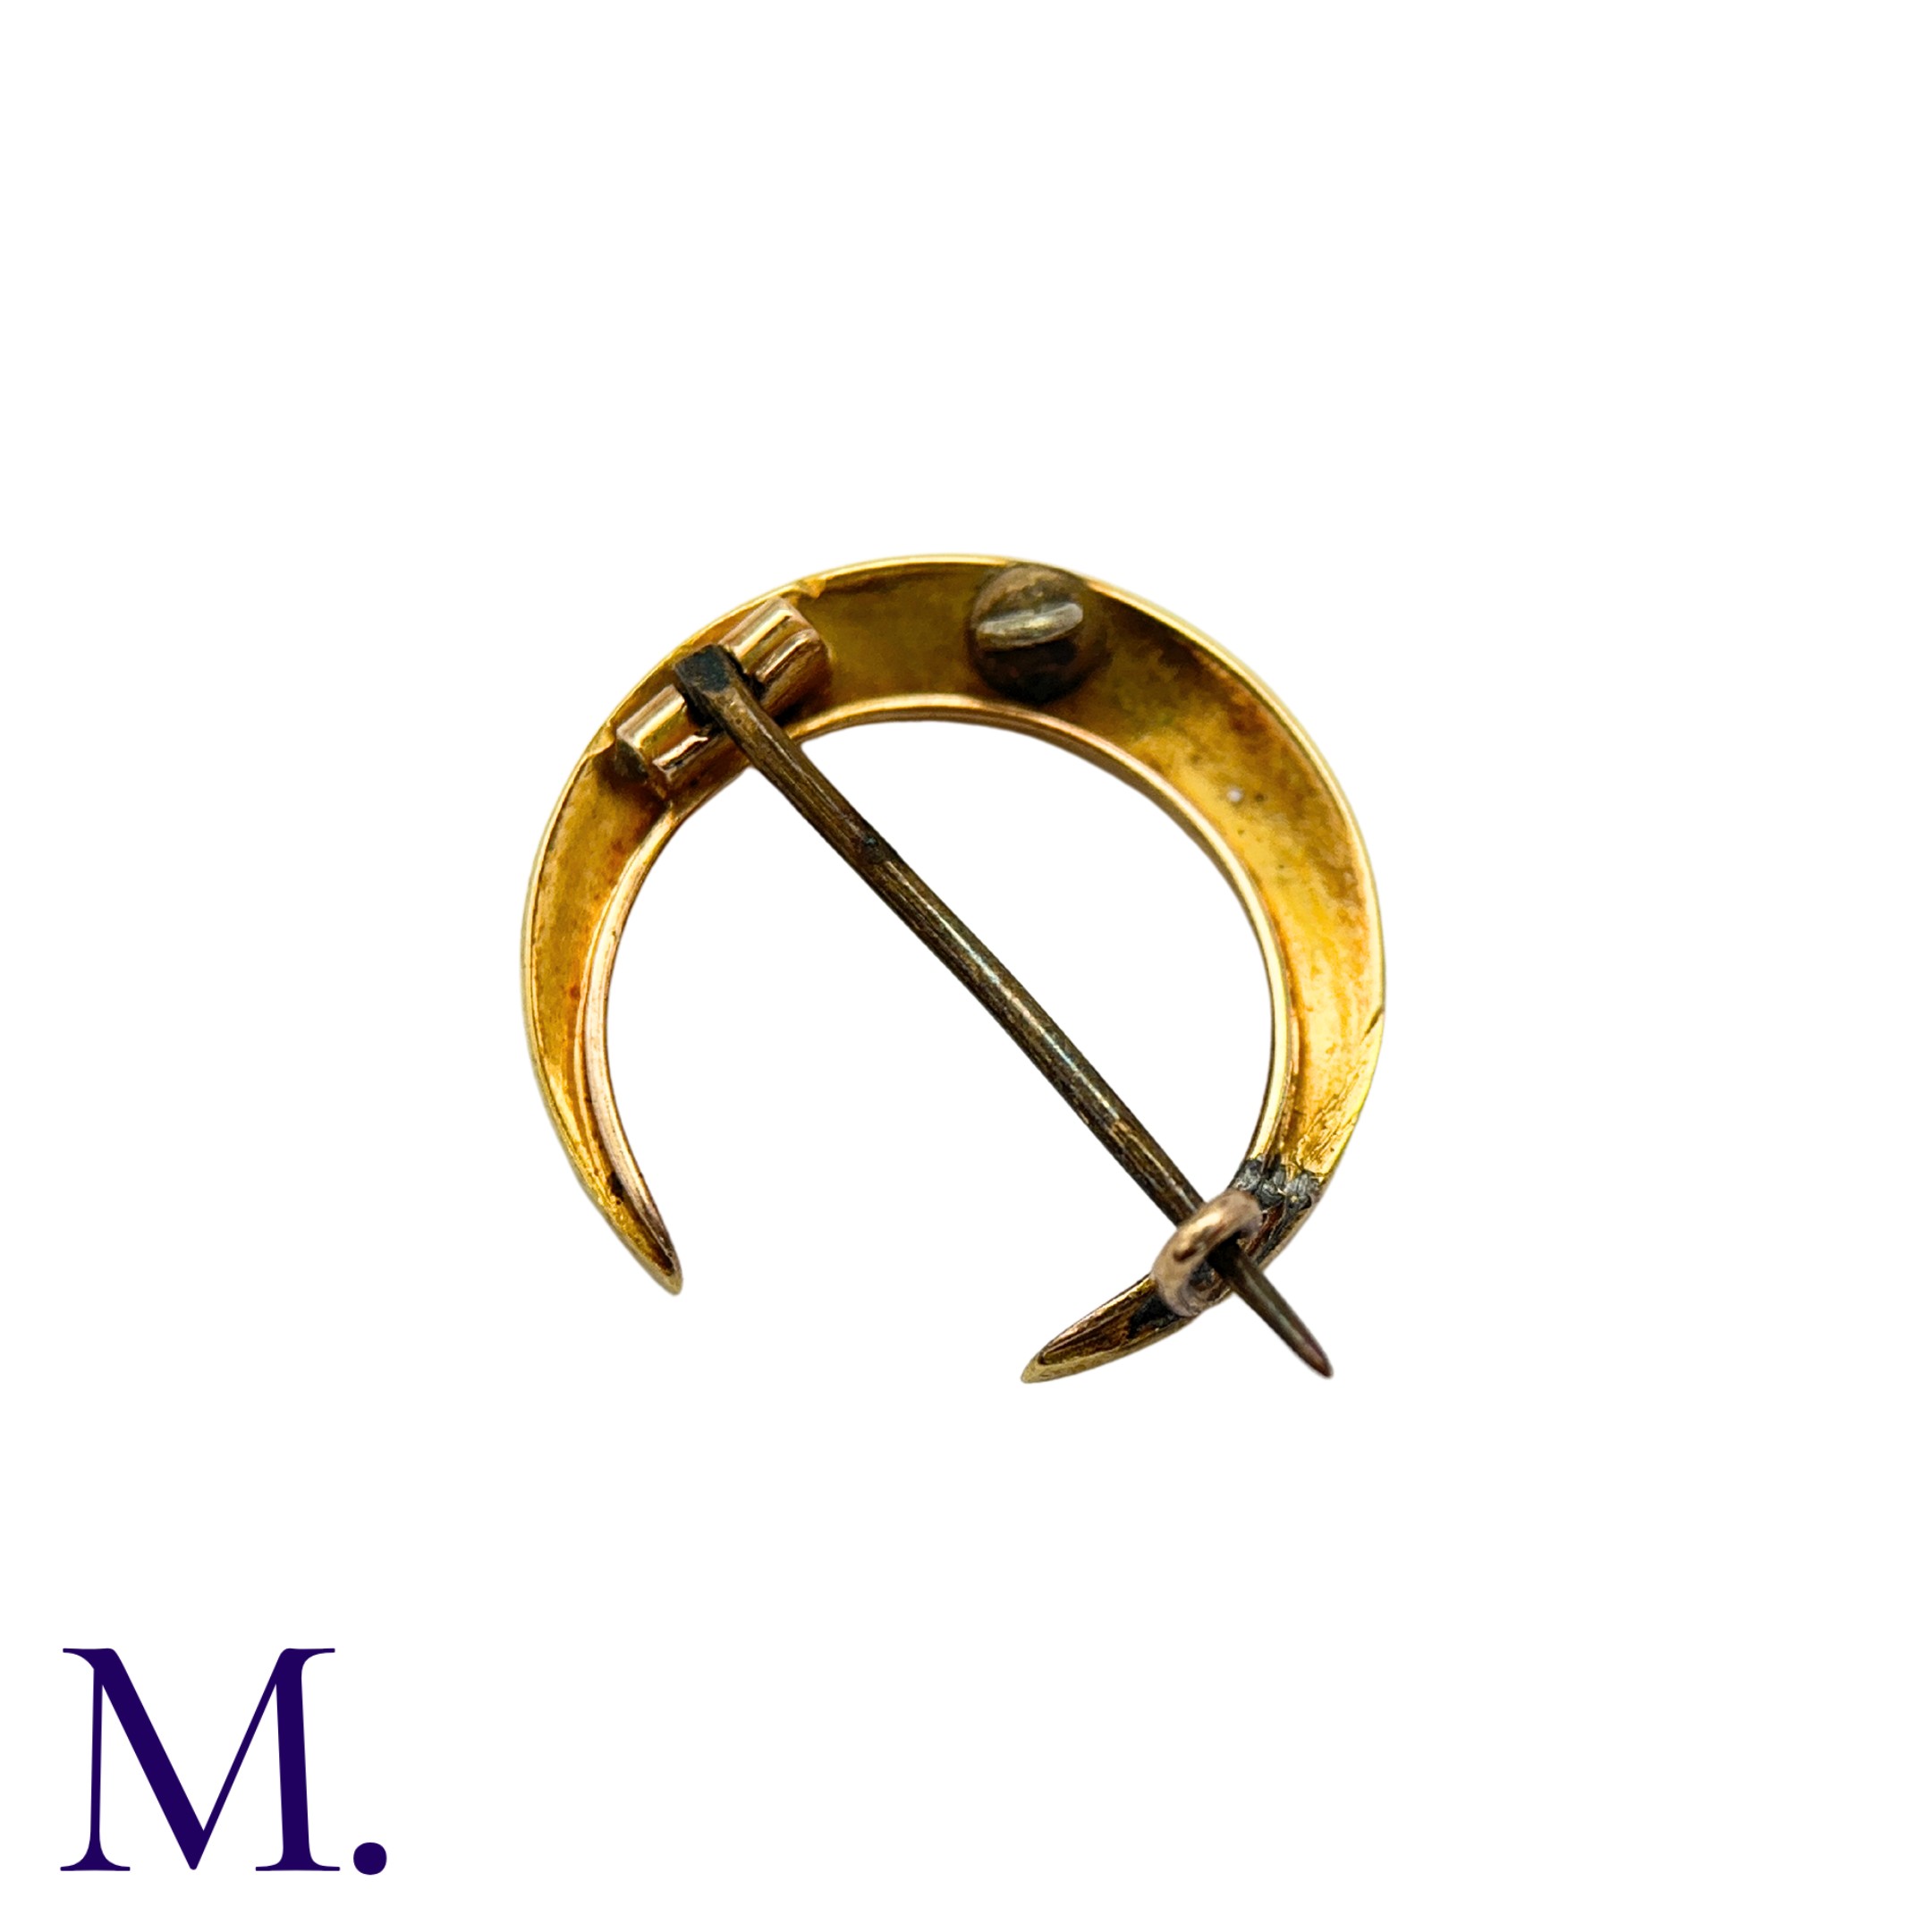 A Pearl Crescent Brooch in yellow gold, of crescent form set with a row of graduated pearls. - Image 3 of 3